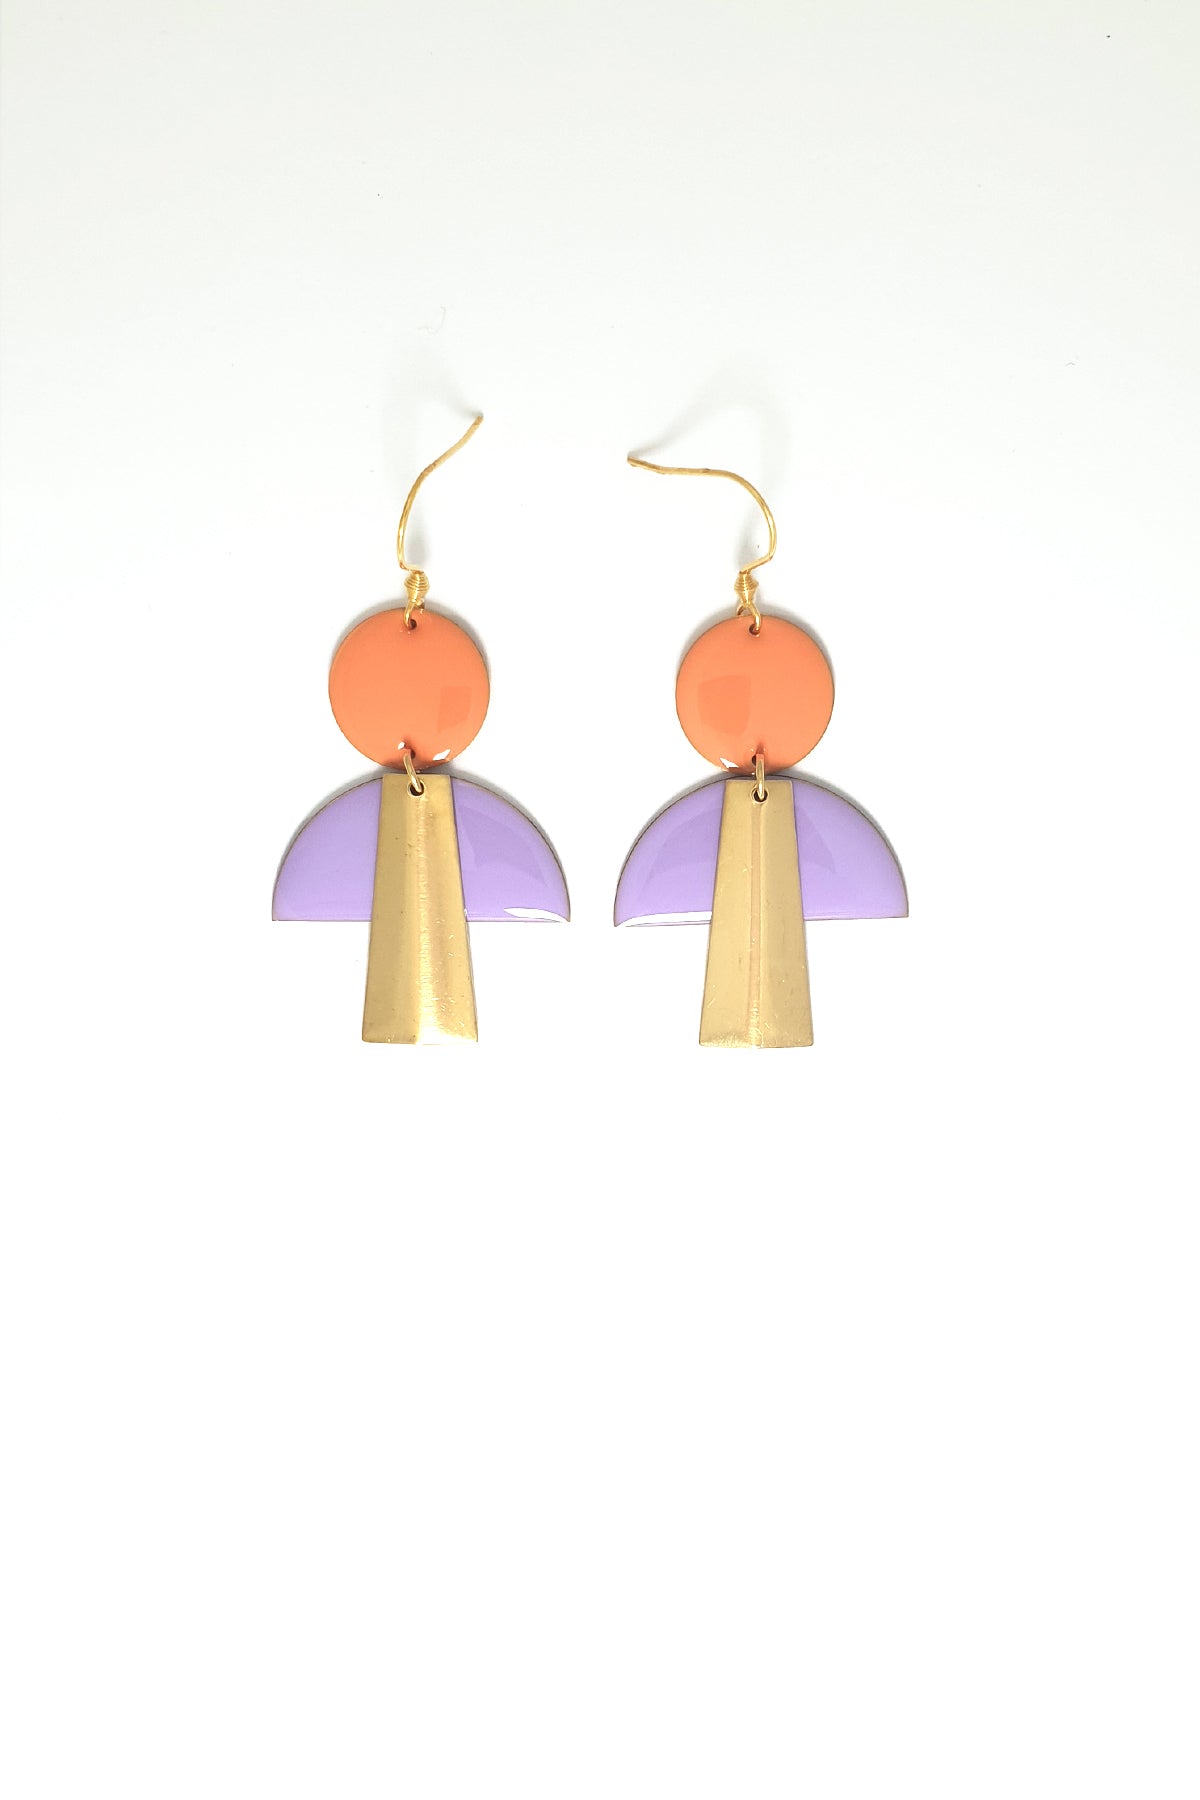 A pair of hook dangle earrings are placed against a white background. They feature a peach enamel dot, a lilac enamel arch shape, and an elongated trapezoid brass piece.